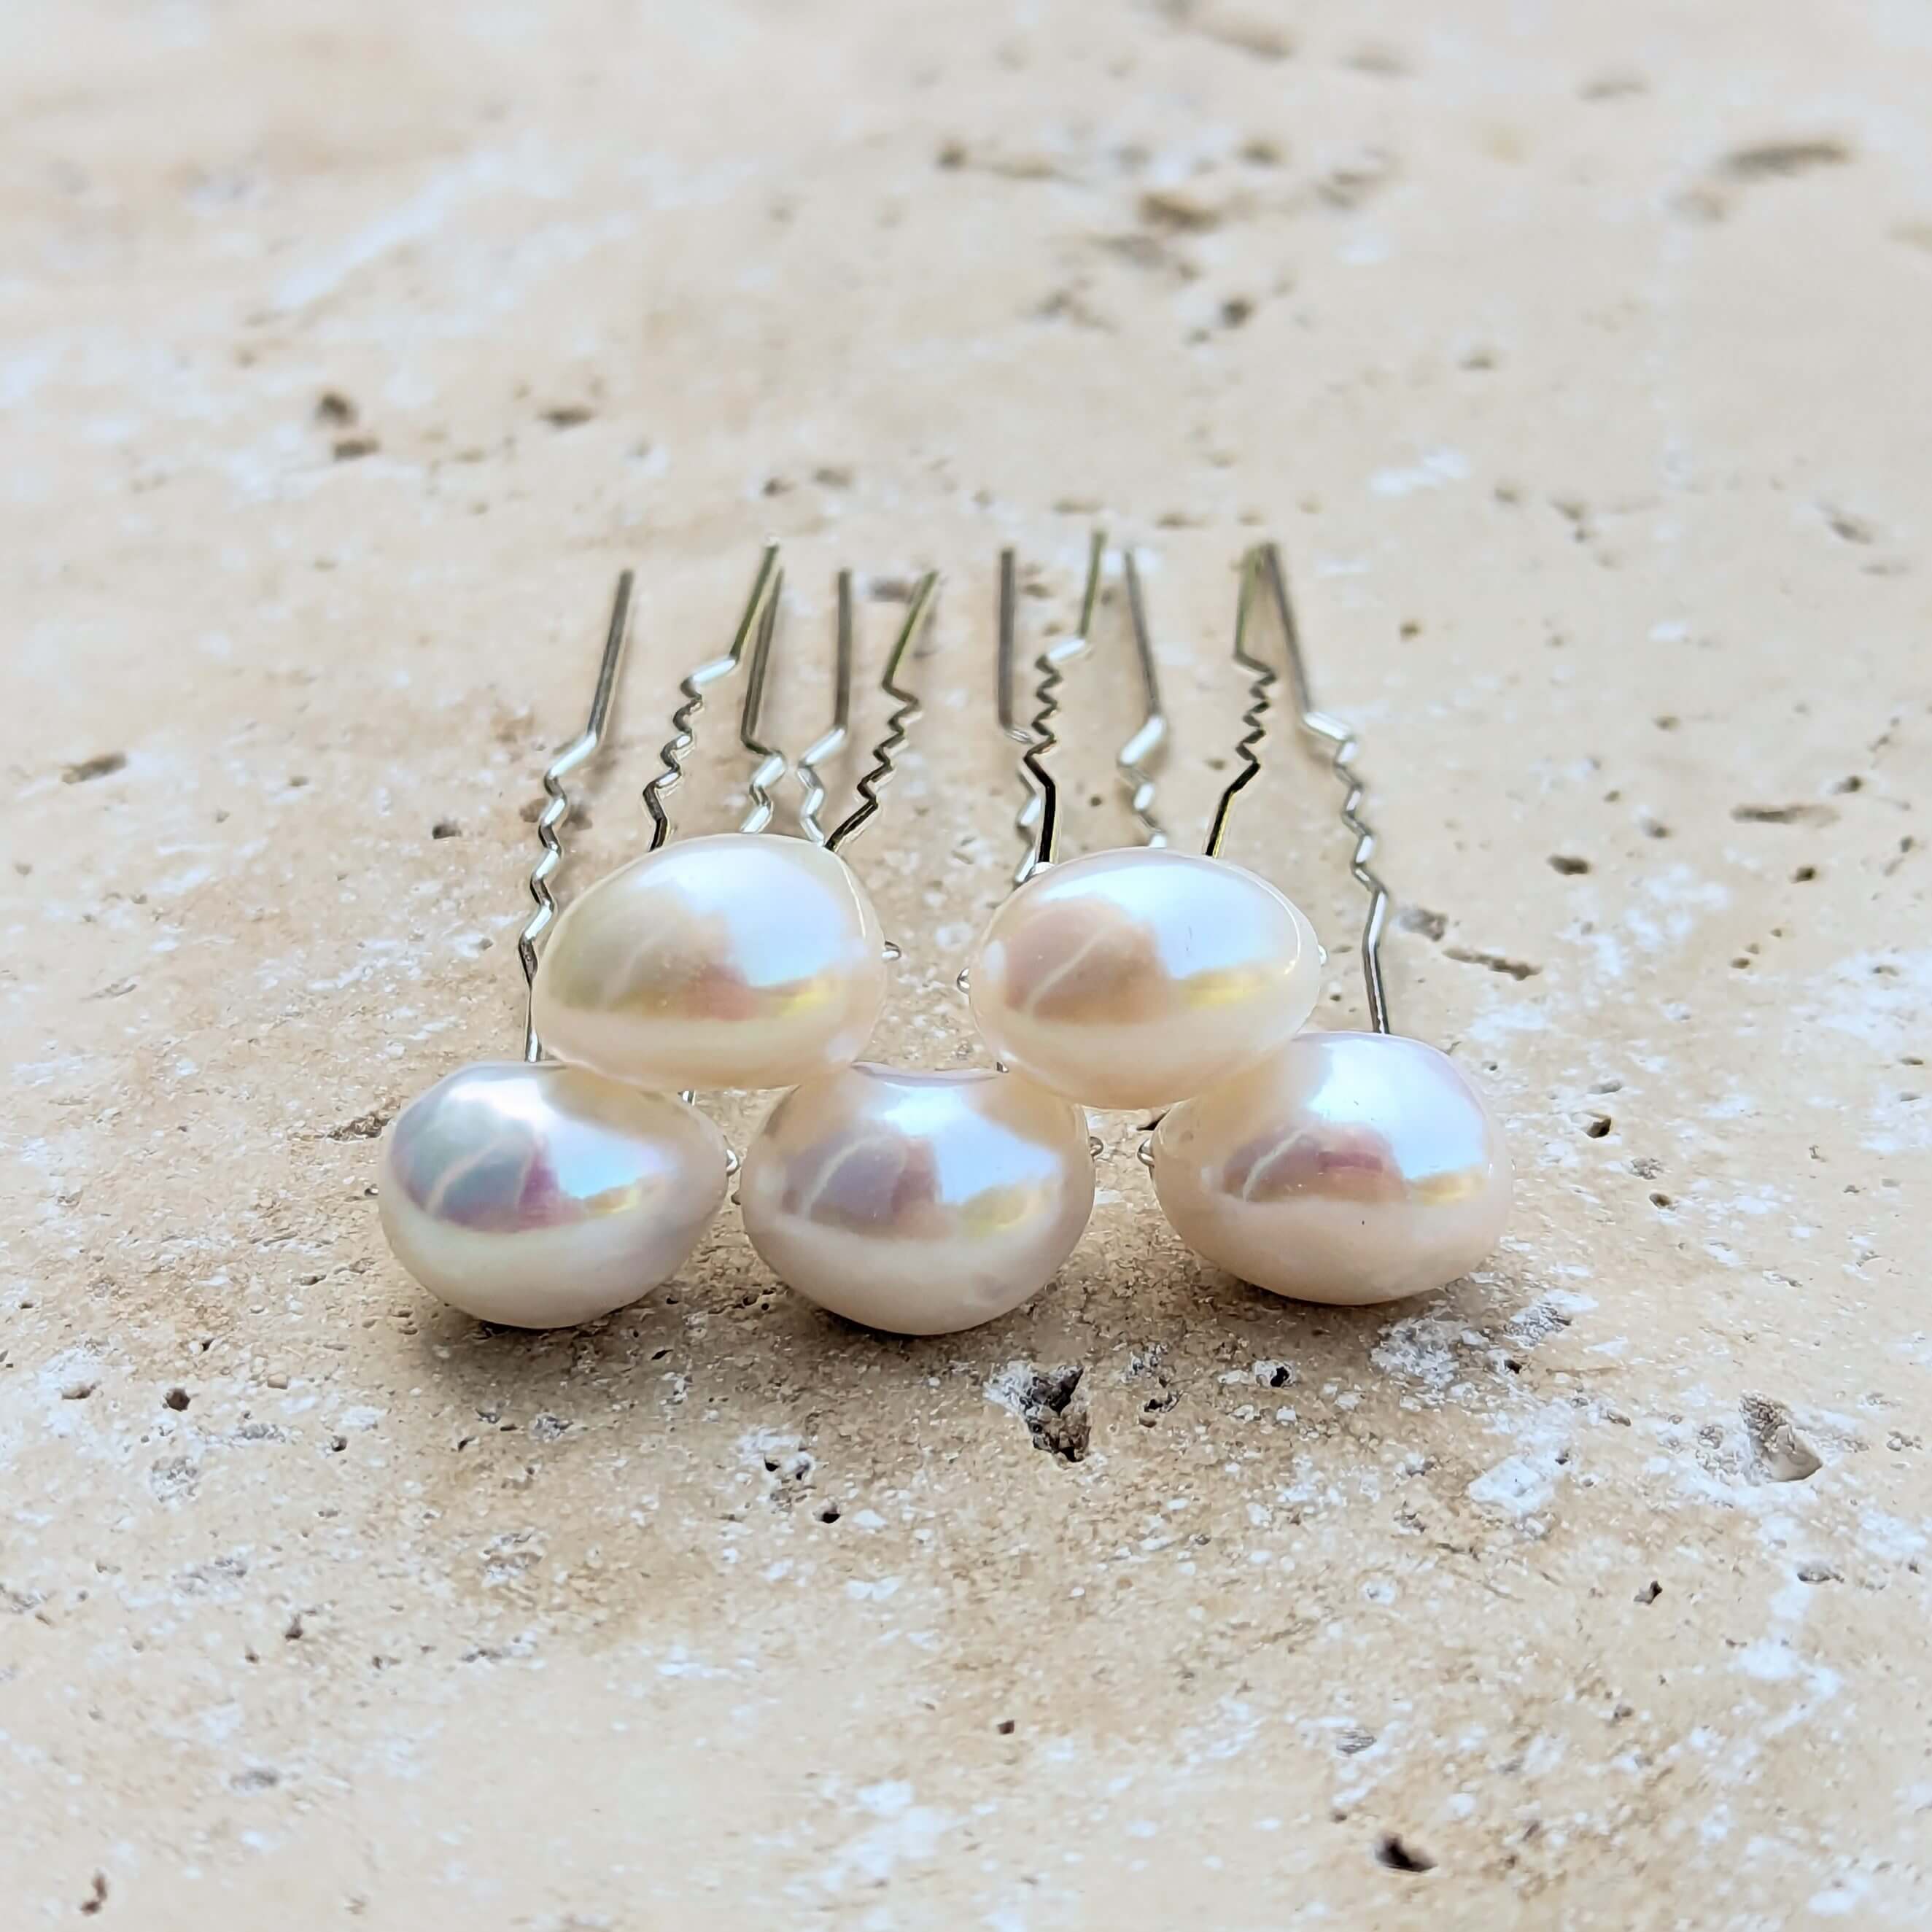 5 large real pearls on silver hair pins